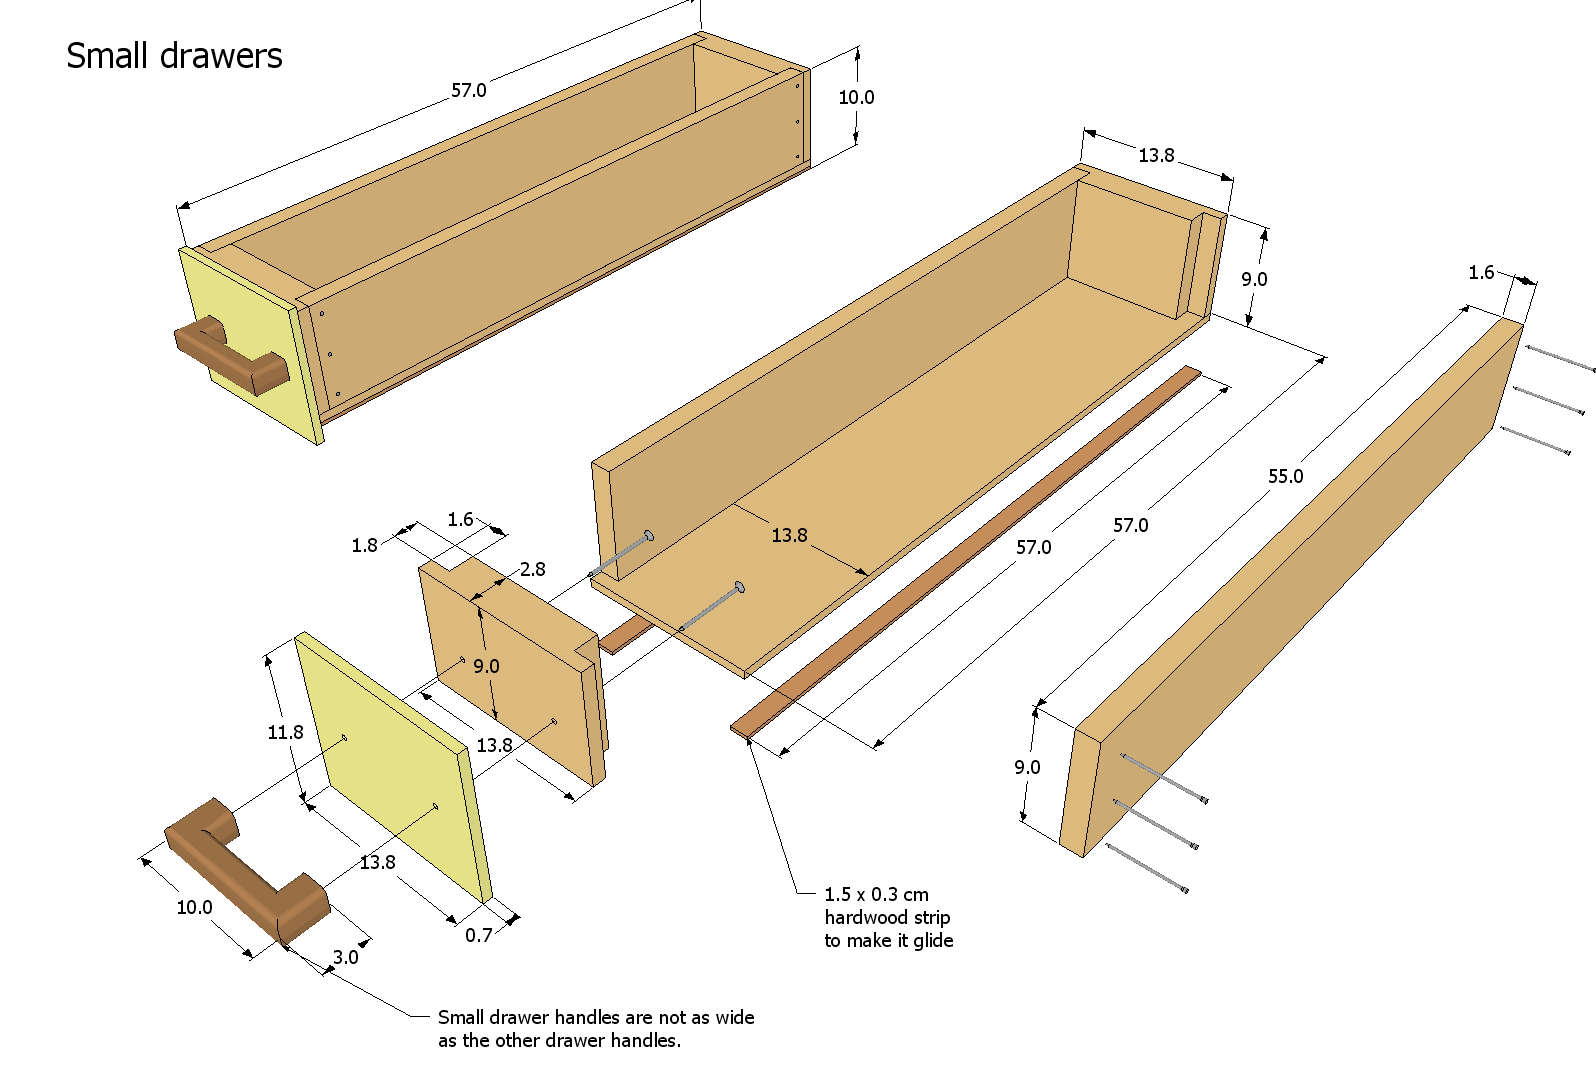 More details on making drawers and drawer handles